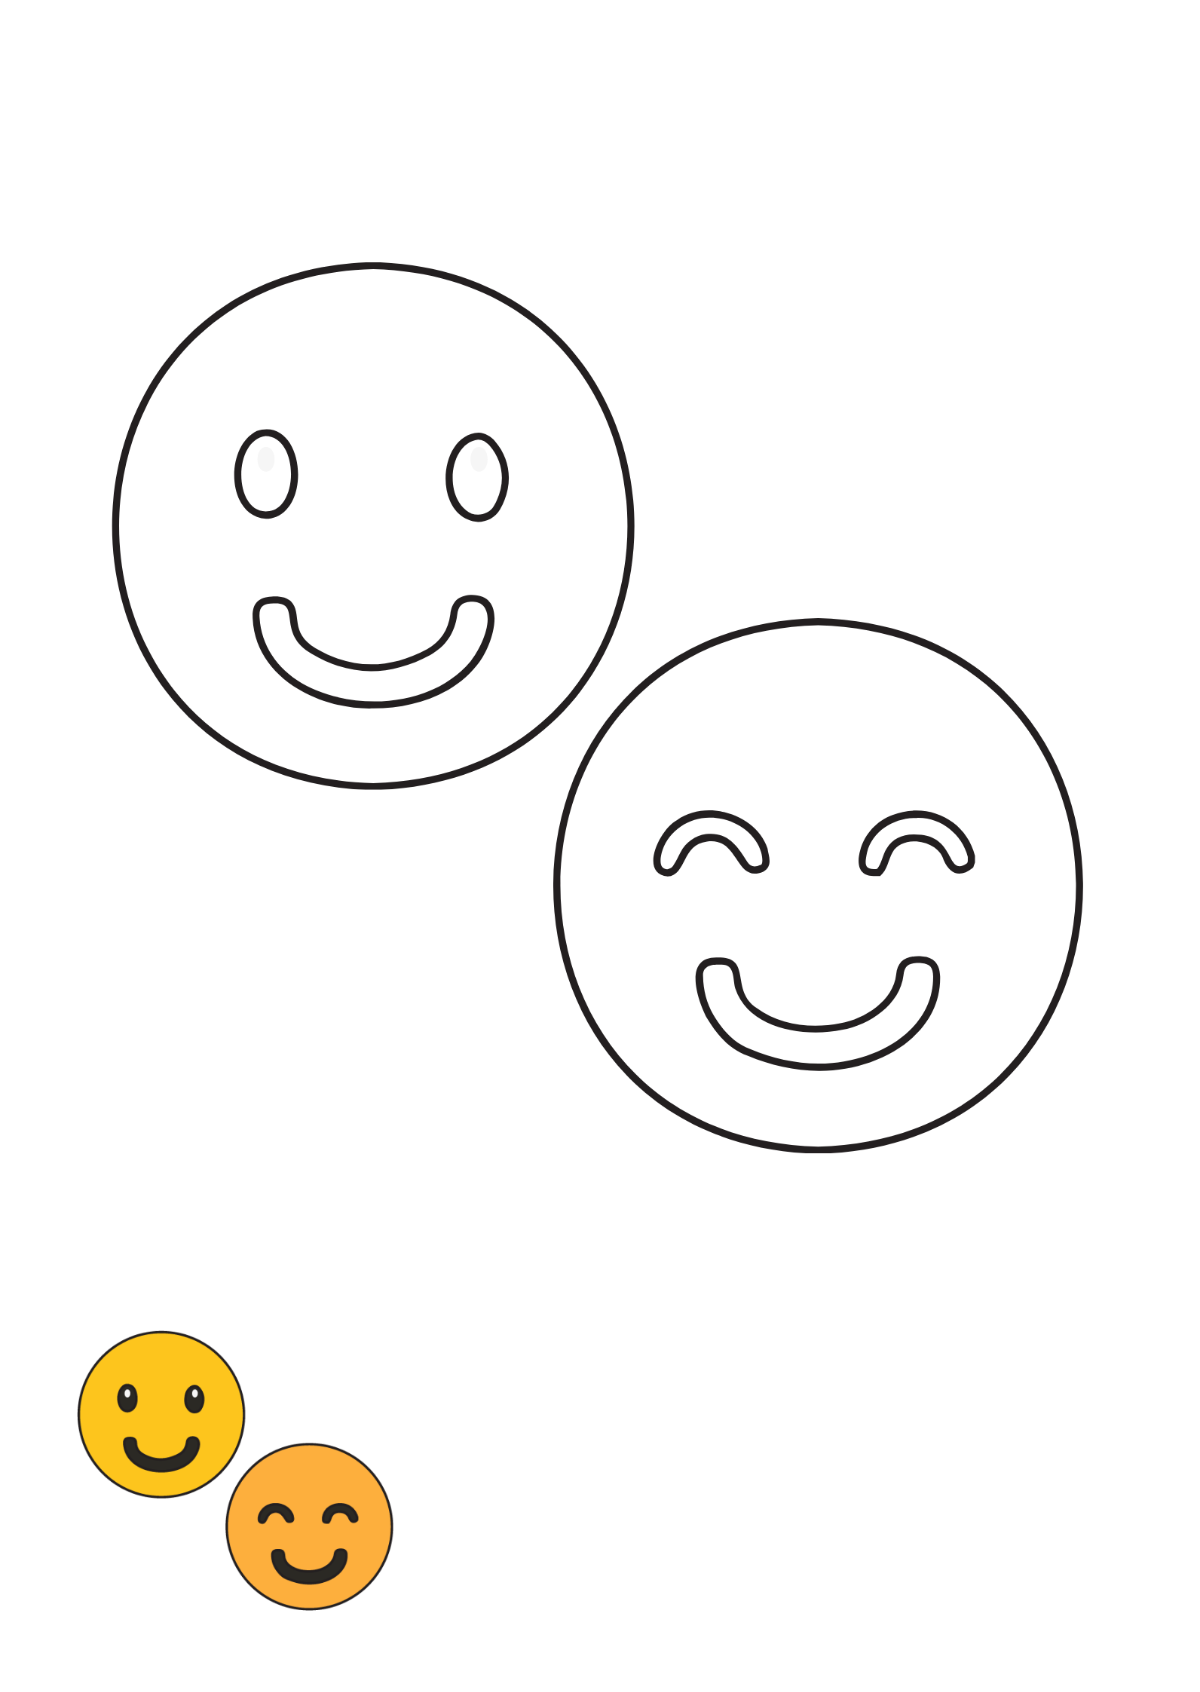 Flat Smiley coloring page Template